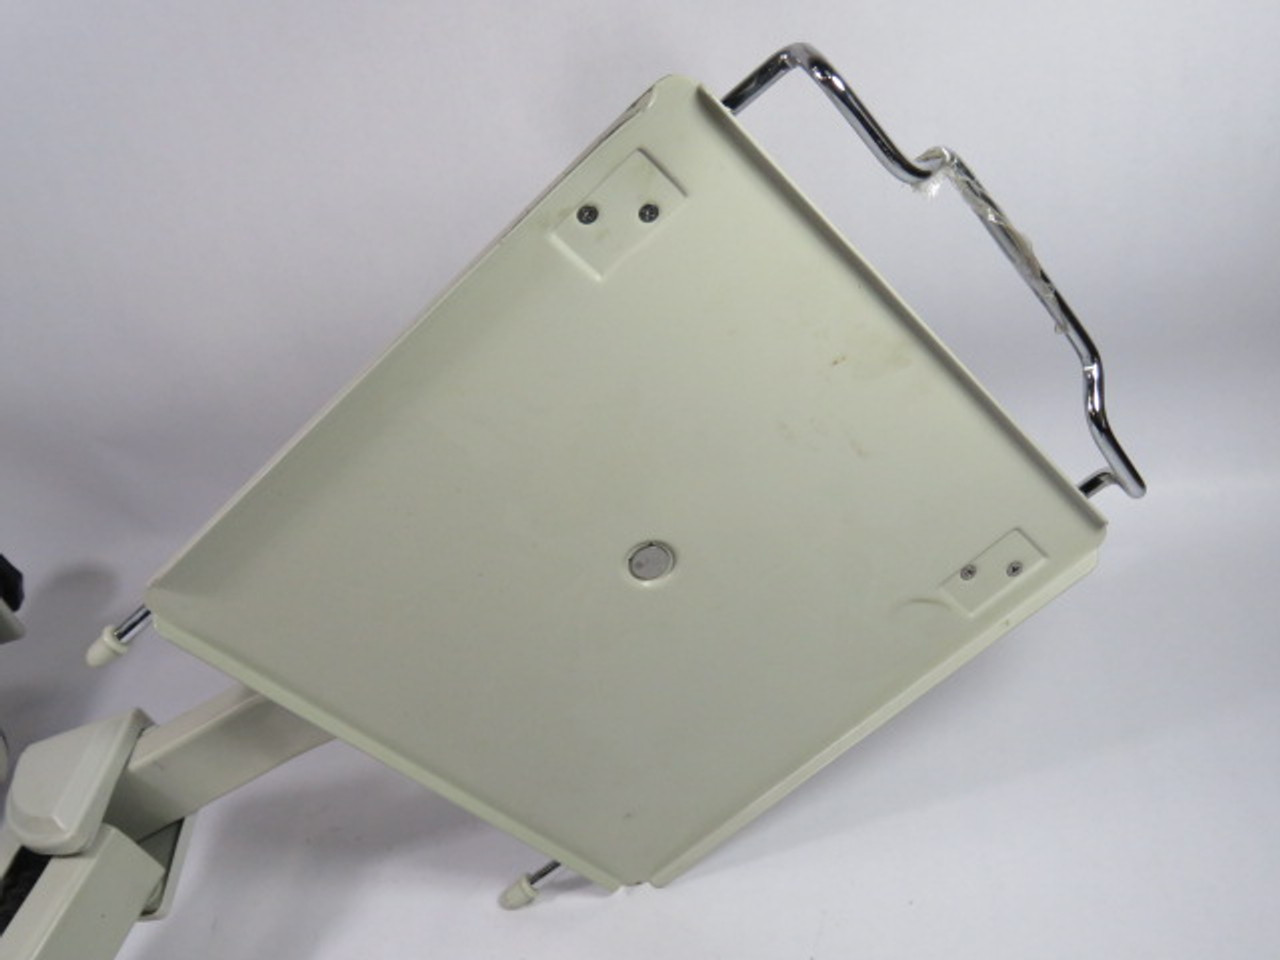 Generic 11-1/4" Square Screen Monitor Mount w/ Arm USED